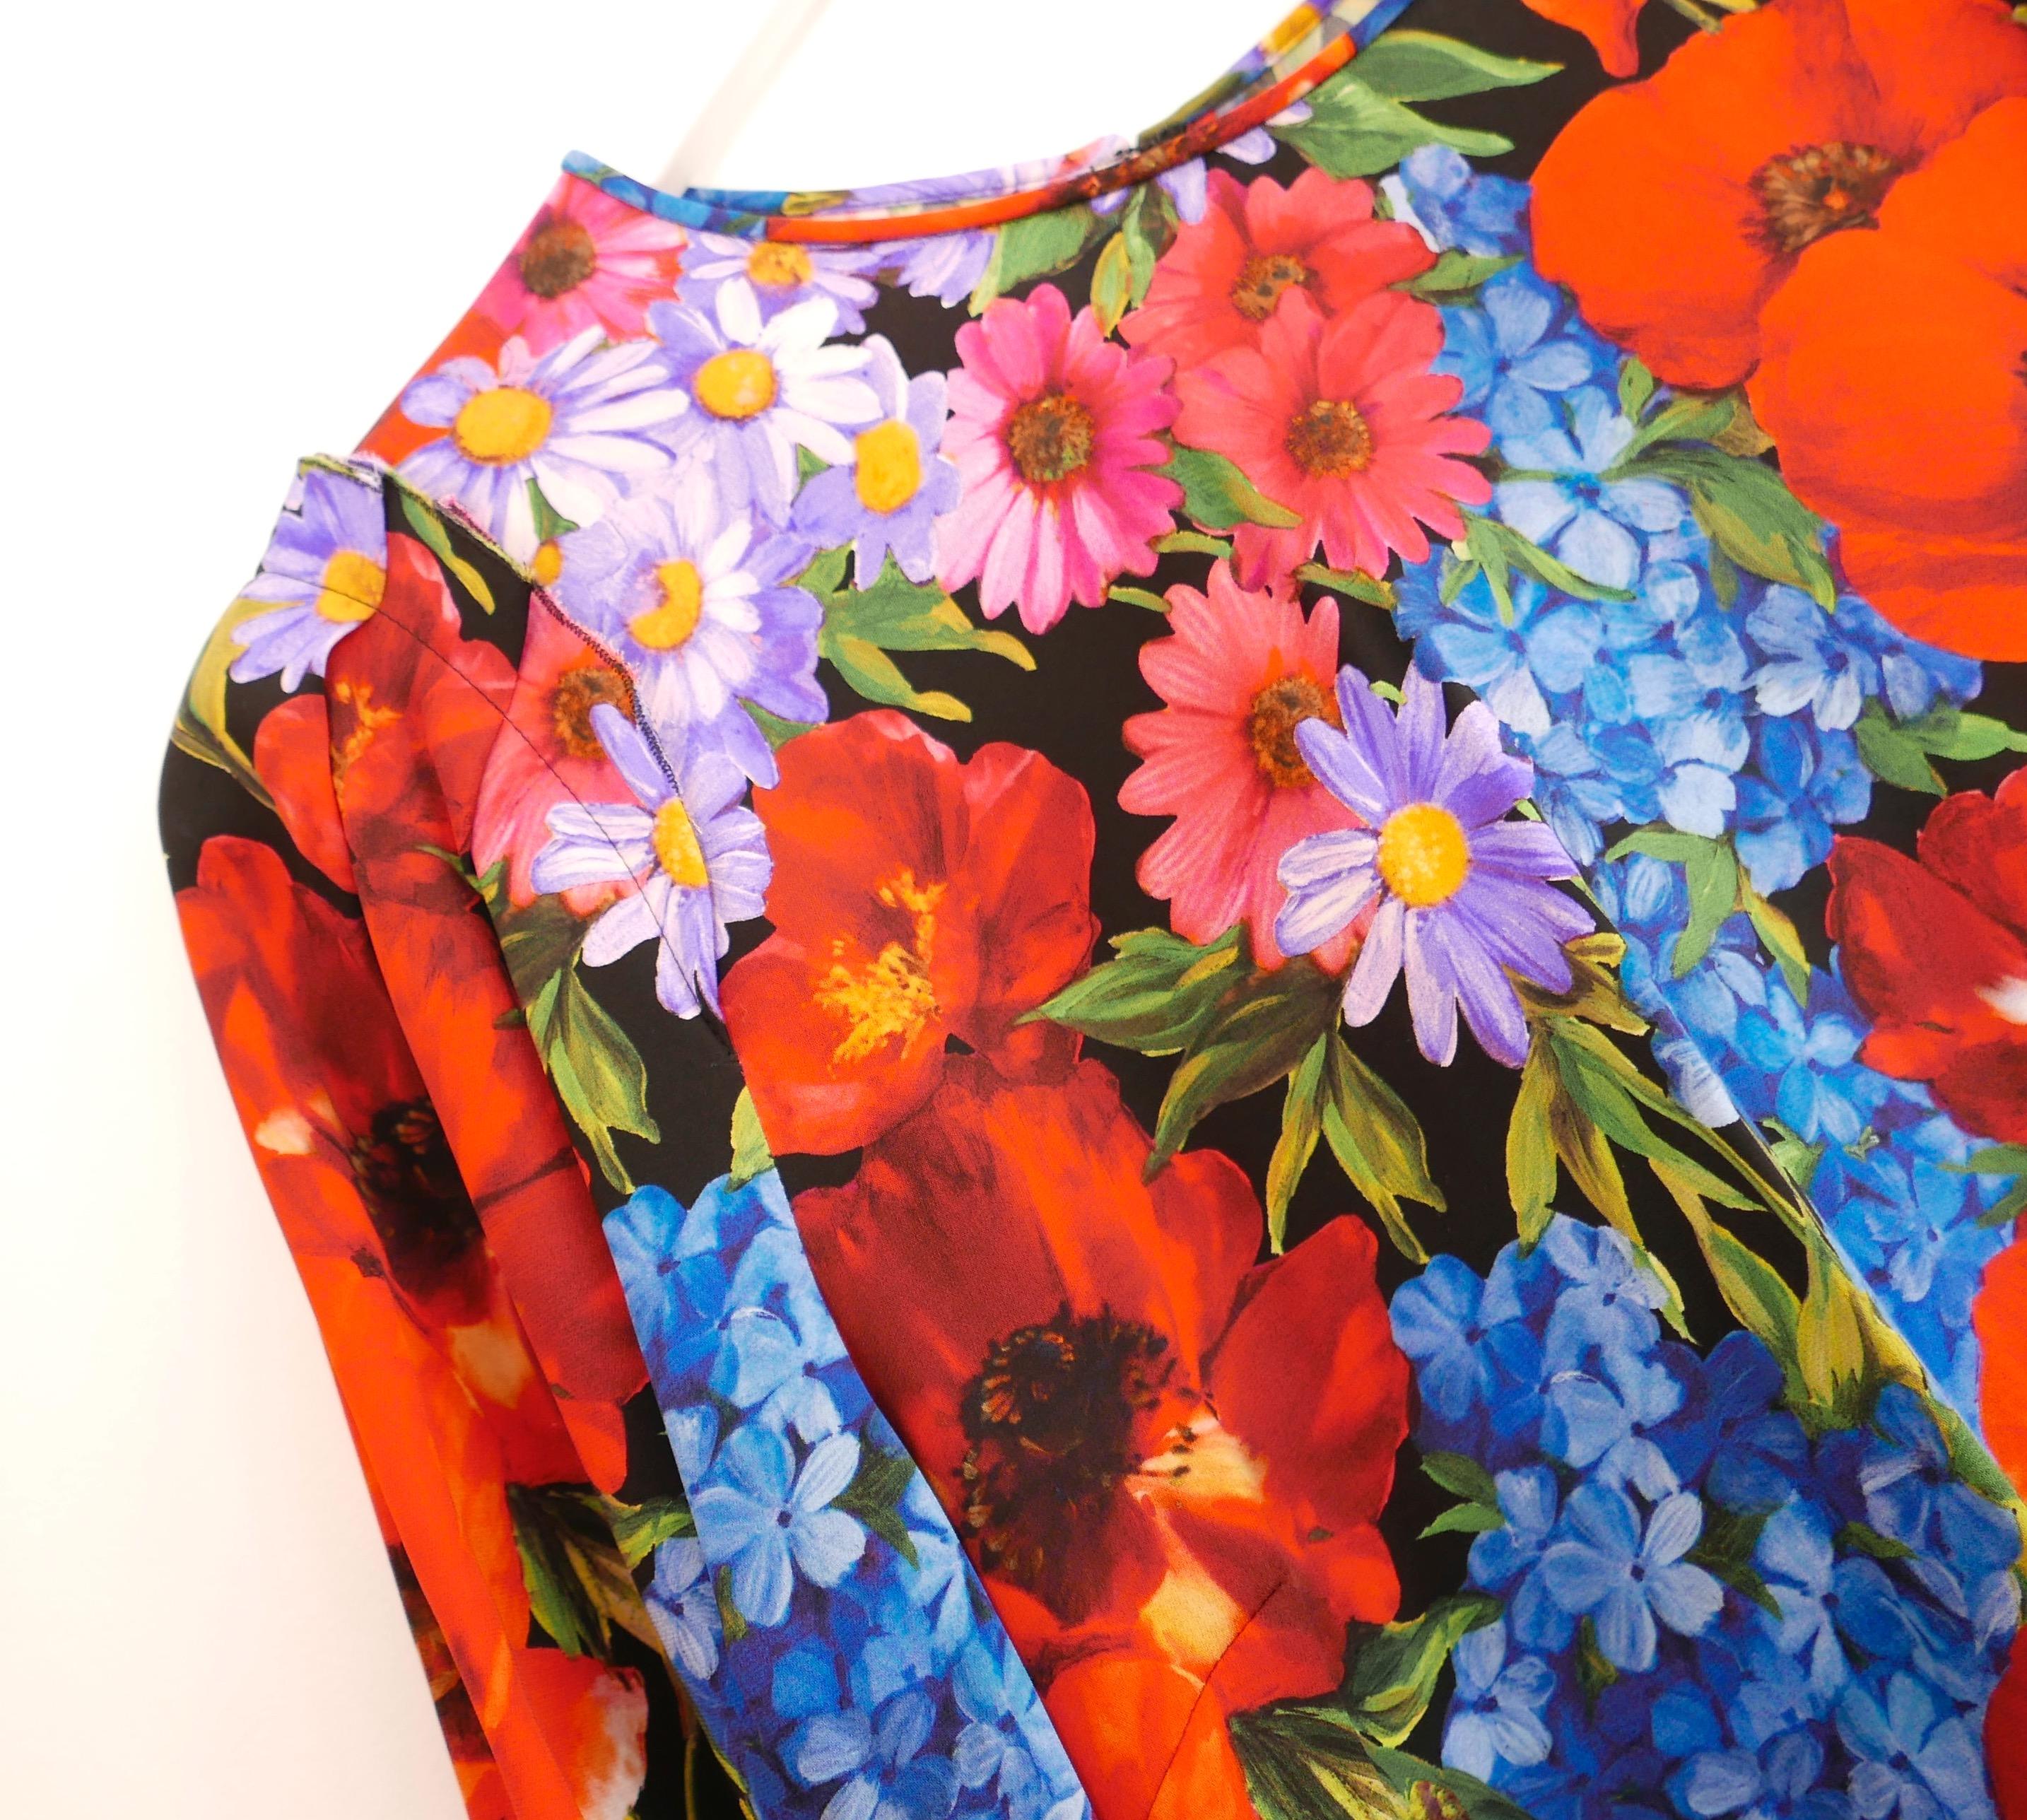 Stunning Dolce & Gabbana poppy print top. bought for £950 and unworn. Made from lightweight silk and elastane with a brightly coloured poppy and mixed floral print on a black background. It has a super fluid, relaxed cut with piped round neck, long